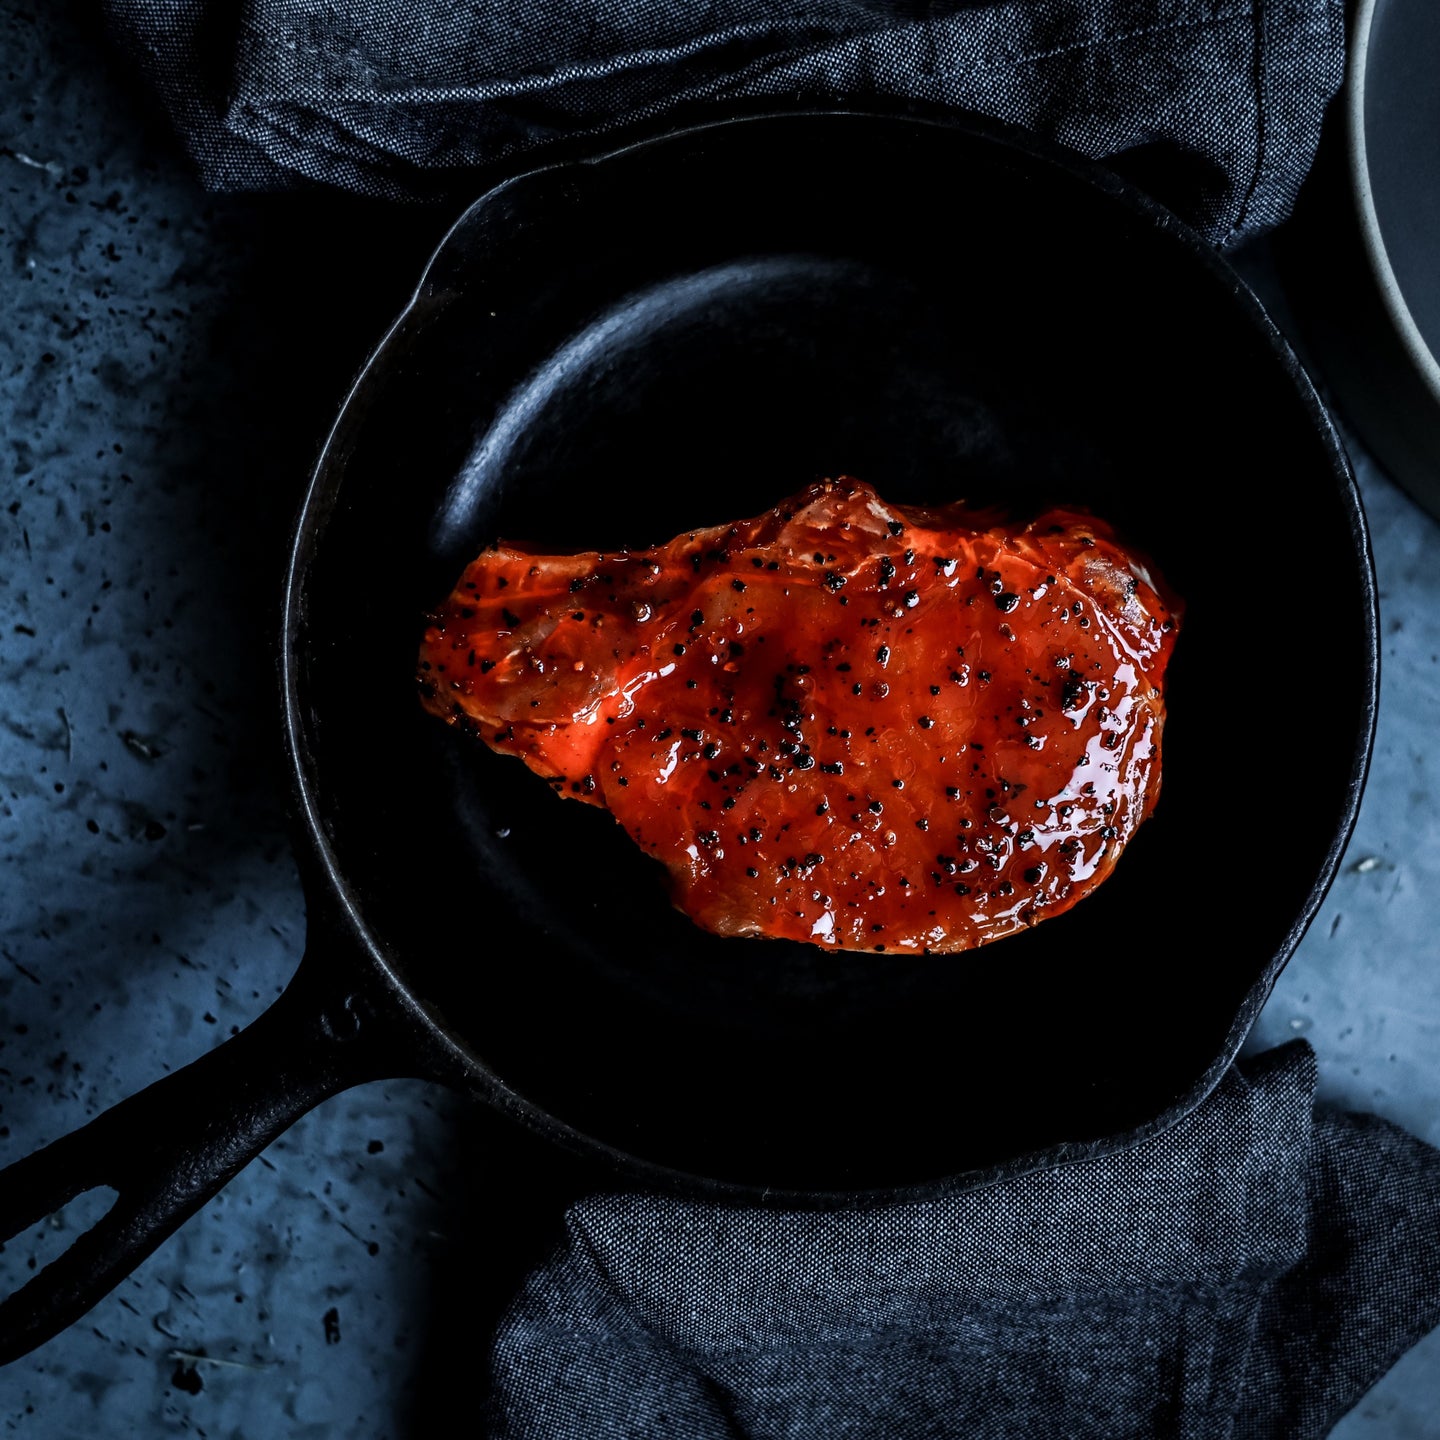 Marinated pork chop with cast iron pan. Cooked with barbecue sauce.